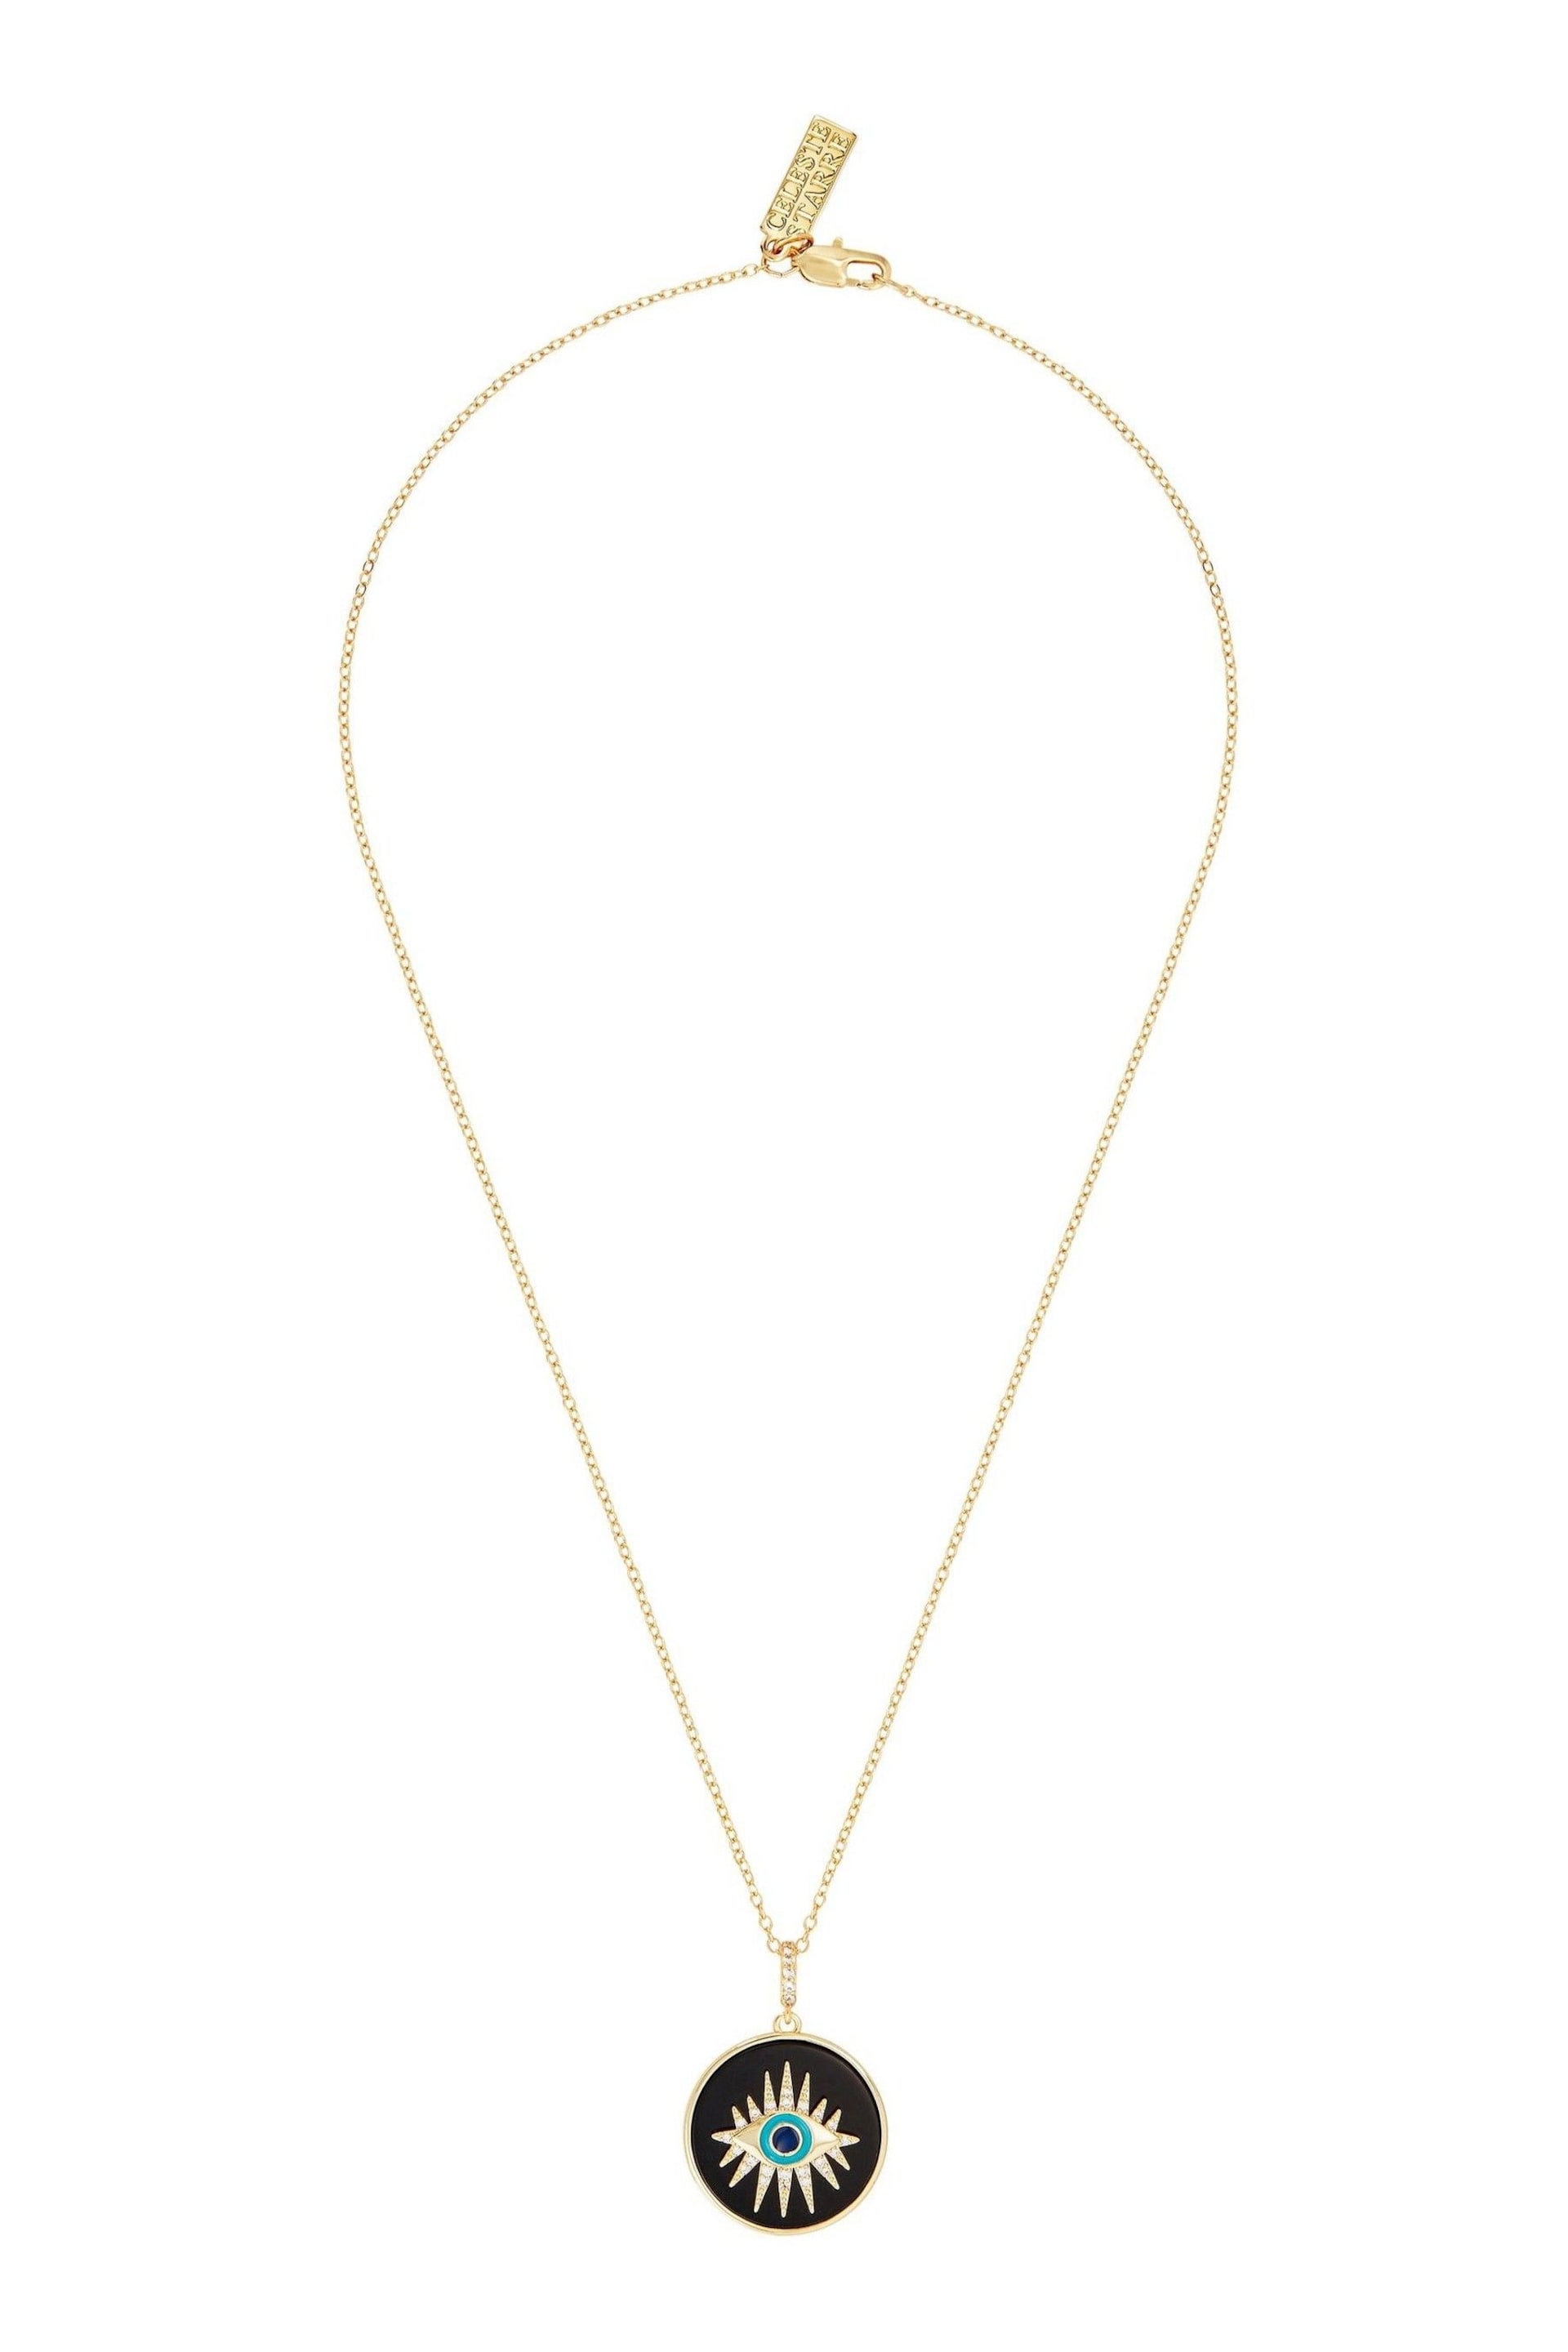 Celeste Starre Gold Tone I Am Protected Necklace - Mykonos Edition - Image 1 of 4